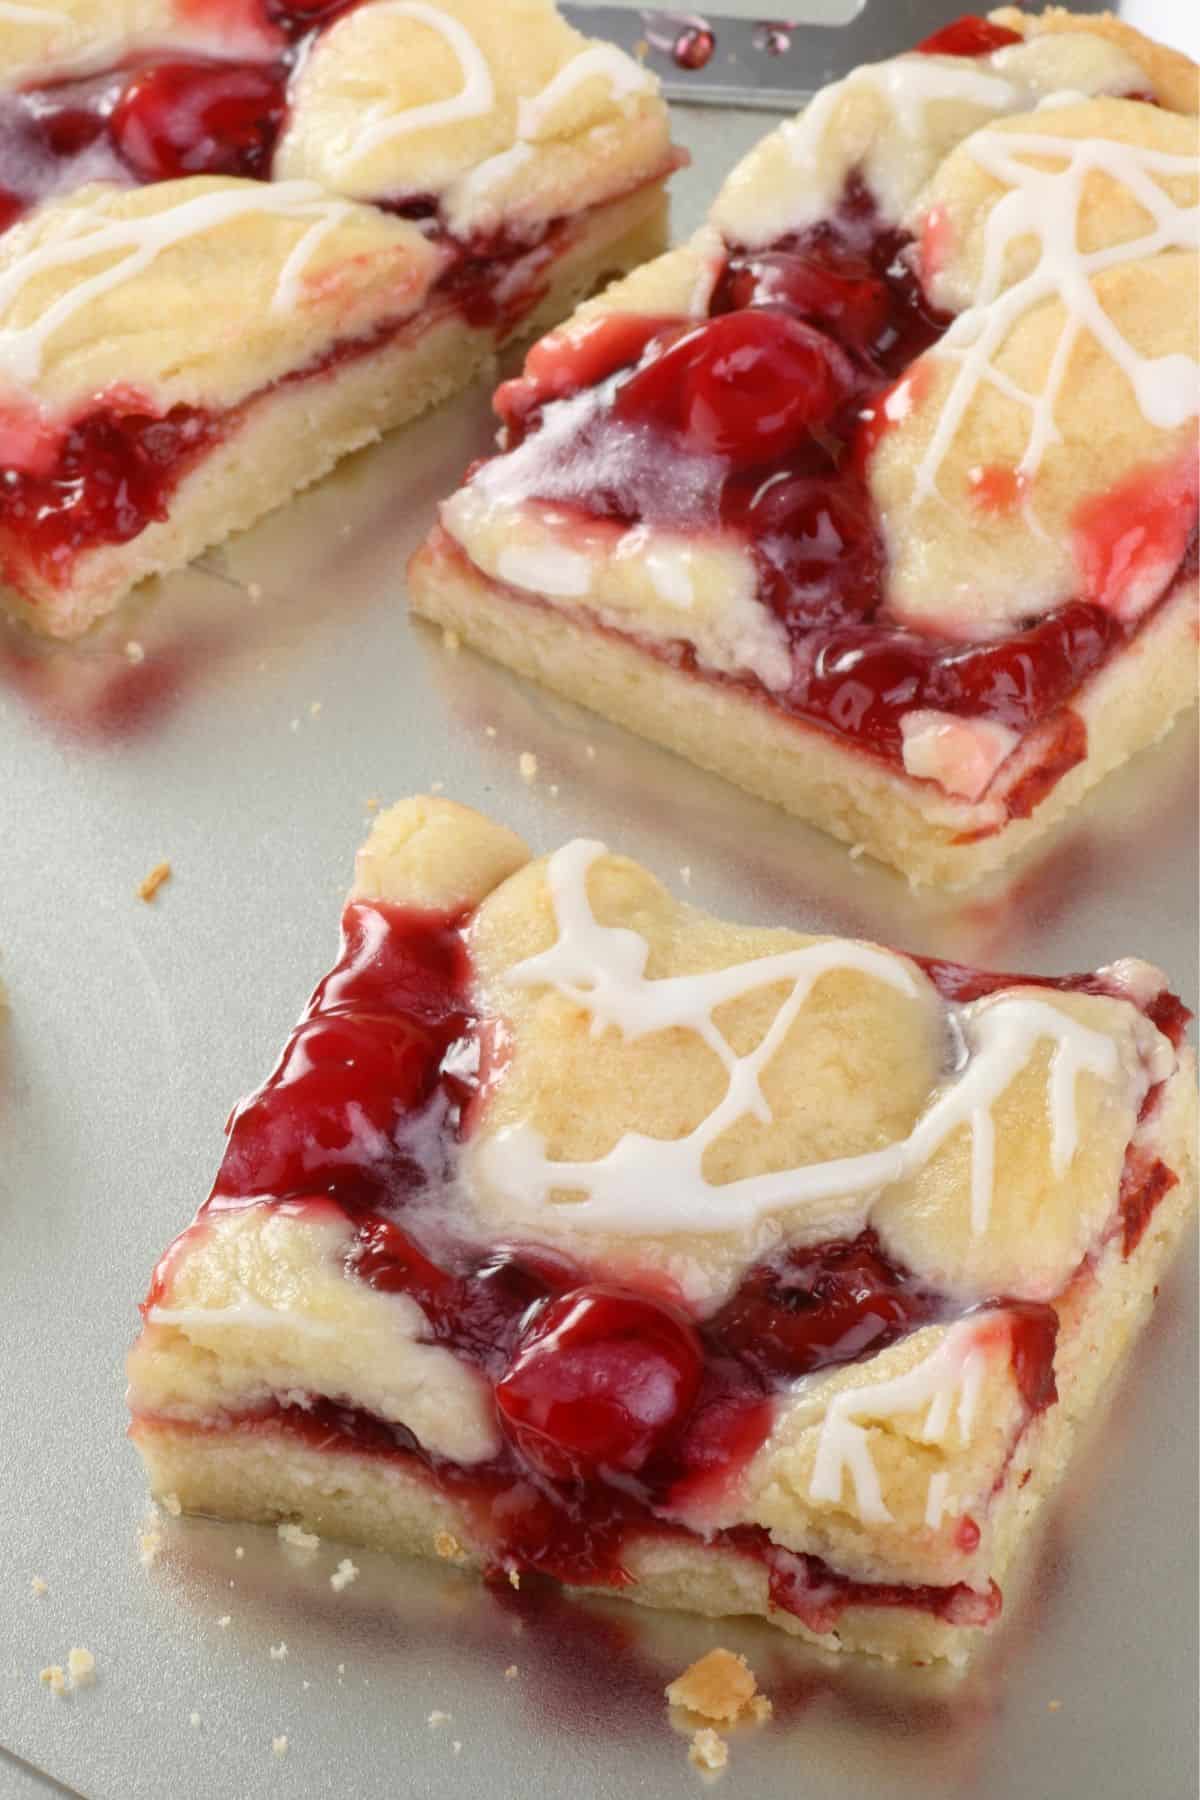 Several cherry dessert bars drizzled with melted white chocolate on a baking sheet.